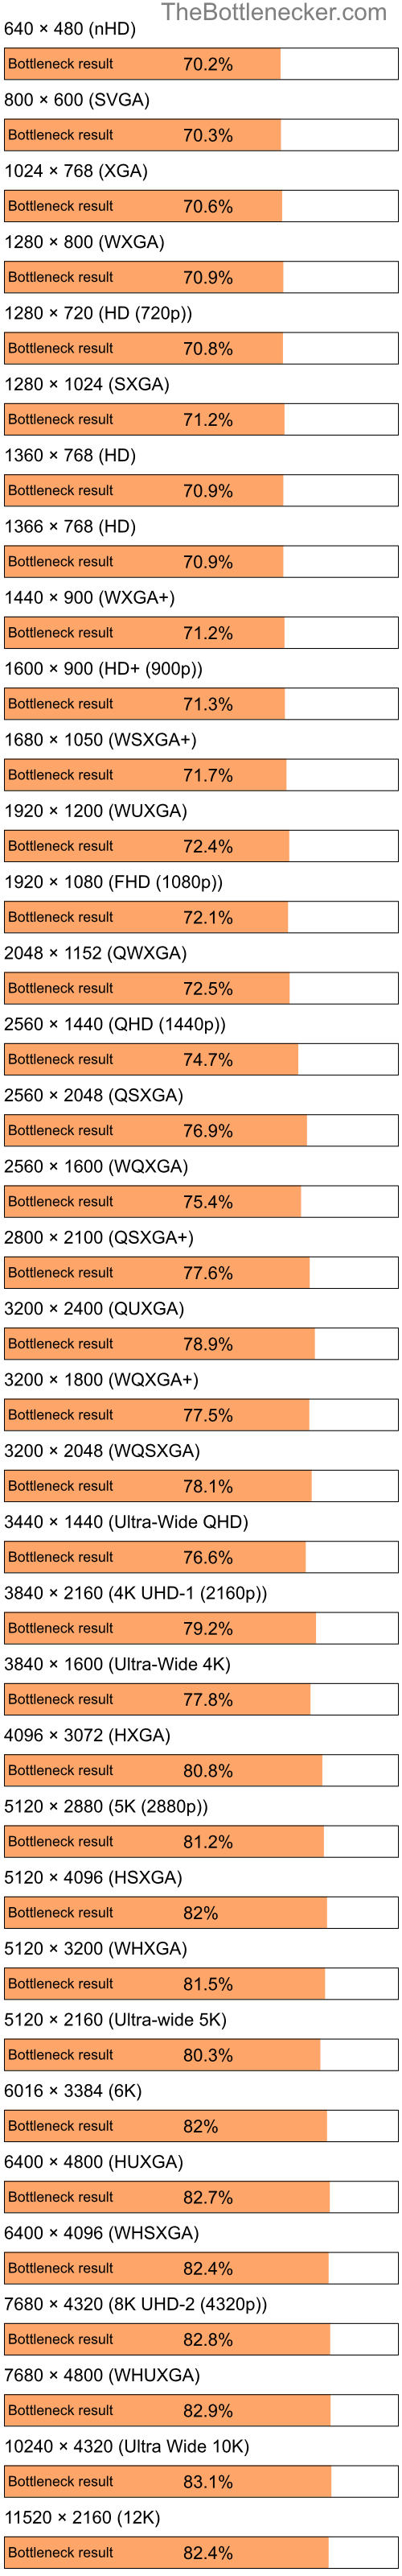 Bottleneck results by resolution for Intel Pentium 4 and AMD Mobility Radeon HD 4250 in Graphic Card Intense Tasks